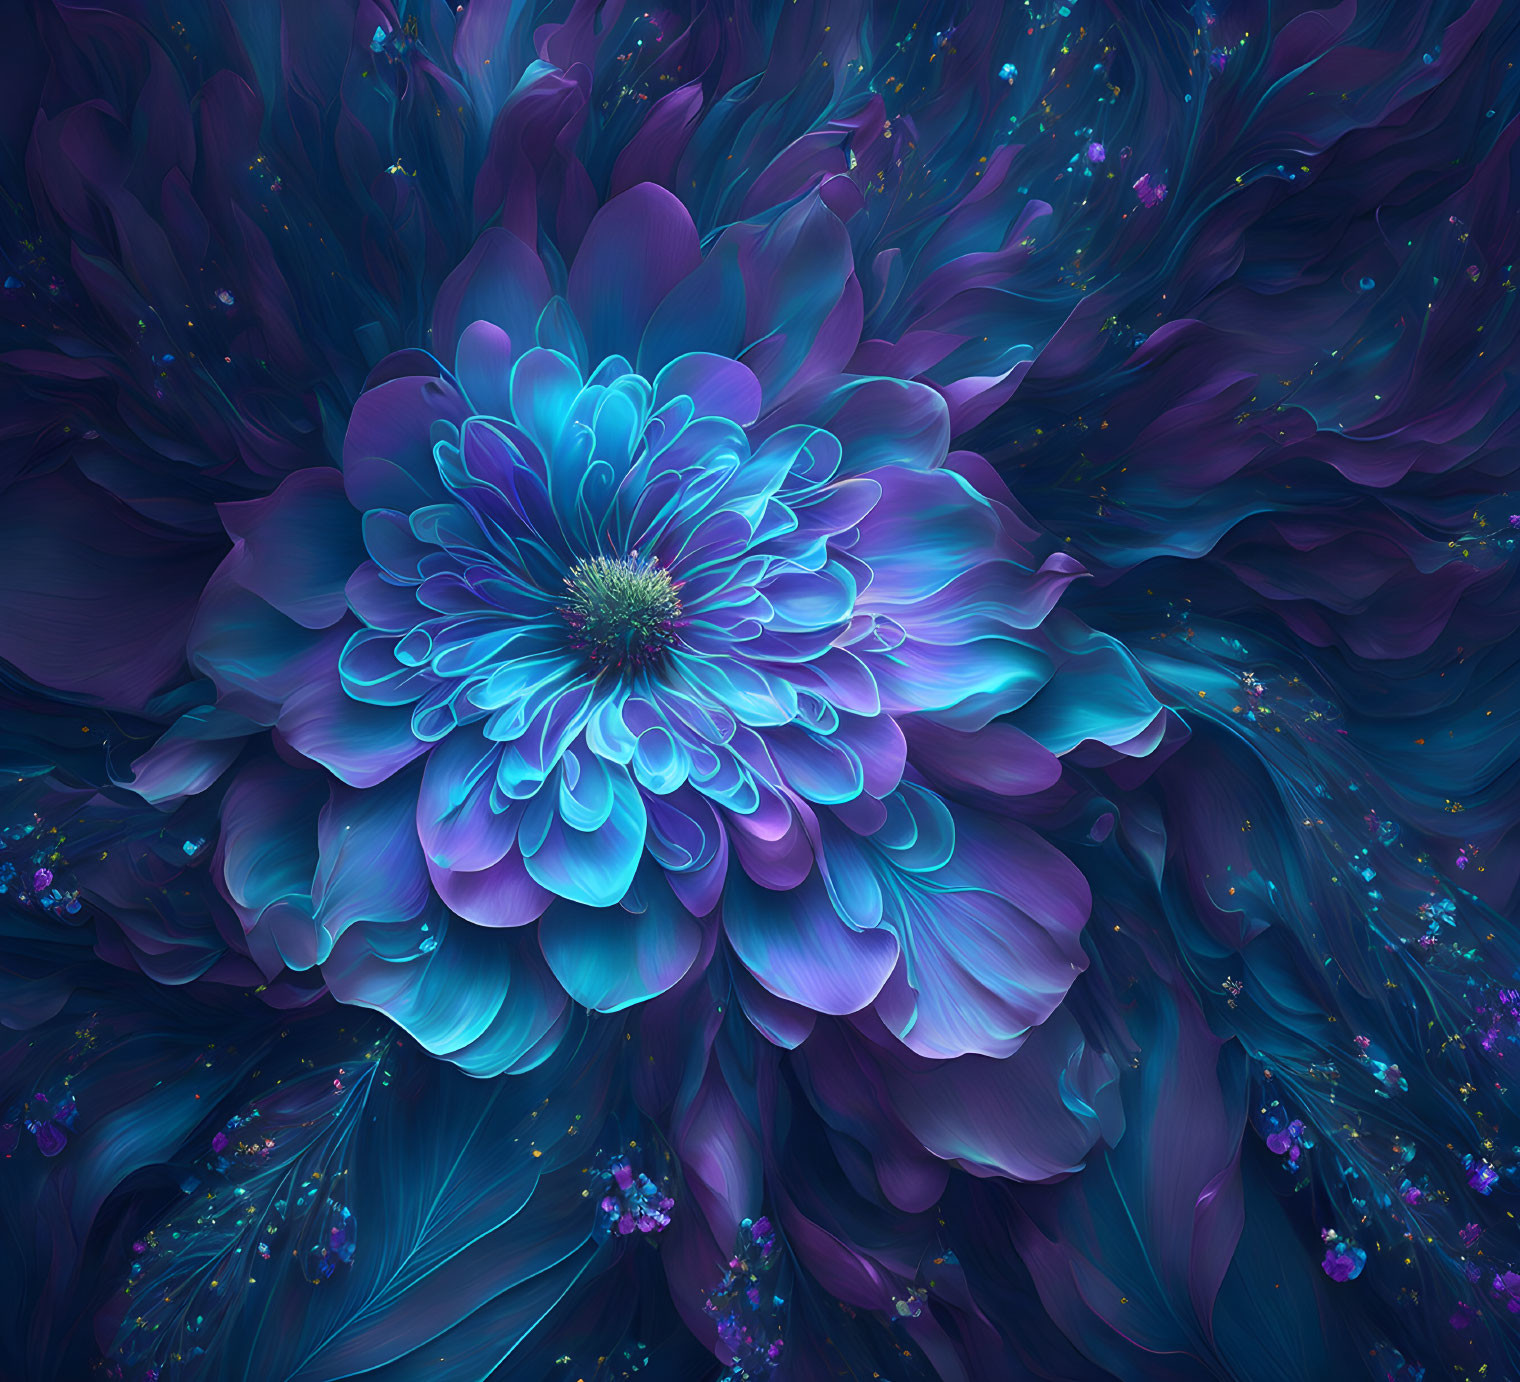 Colorful digital artwork: Blue and purple stylized flower with intricate details